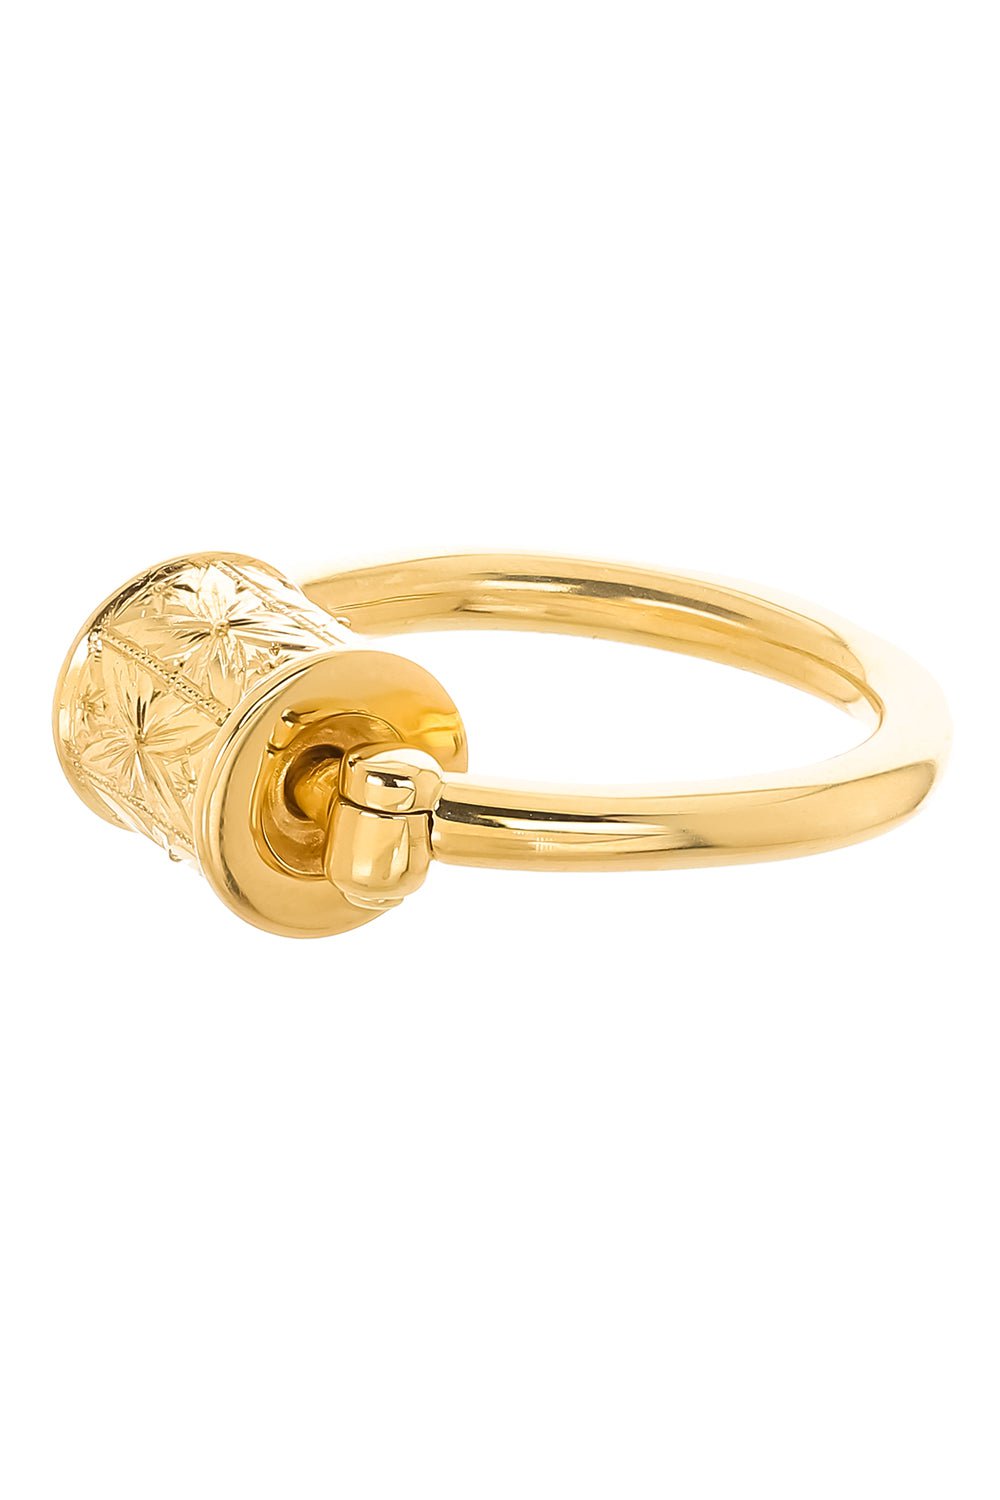 MARLA AARON-Engraved Trundle Ring-YELLOW GOLD